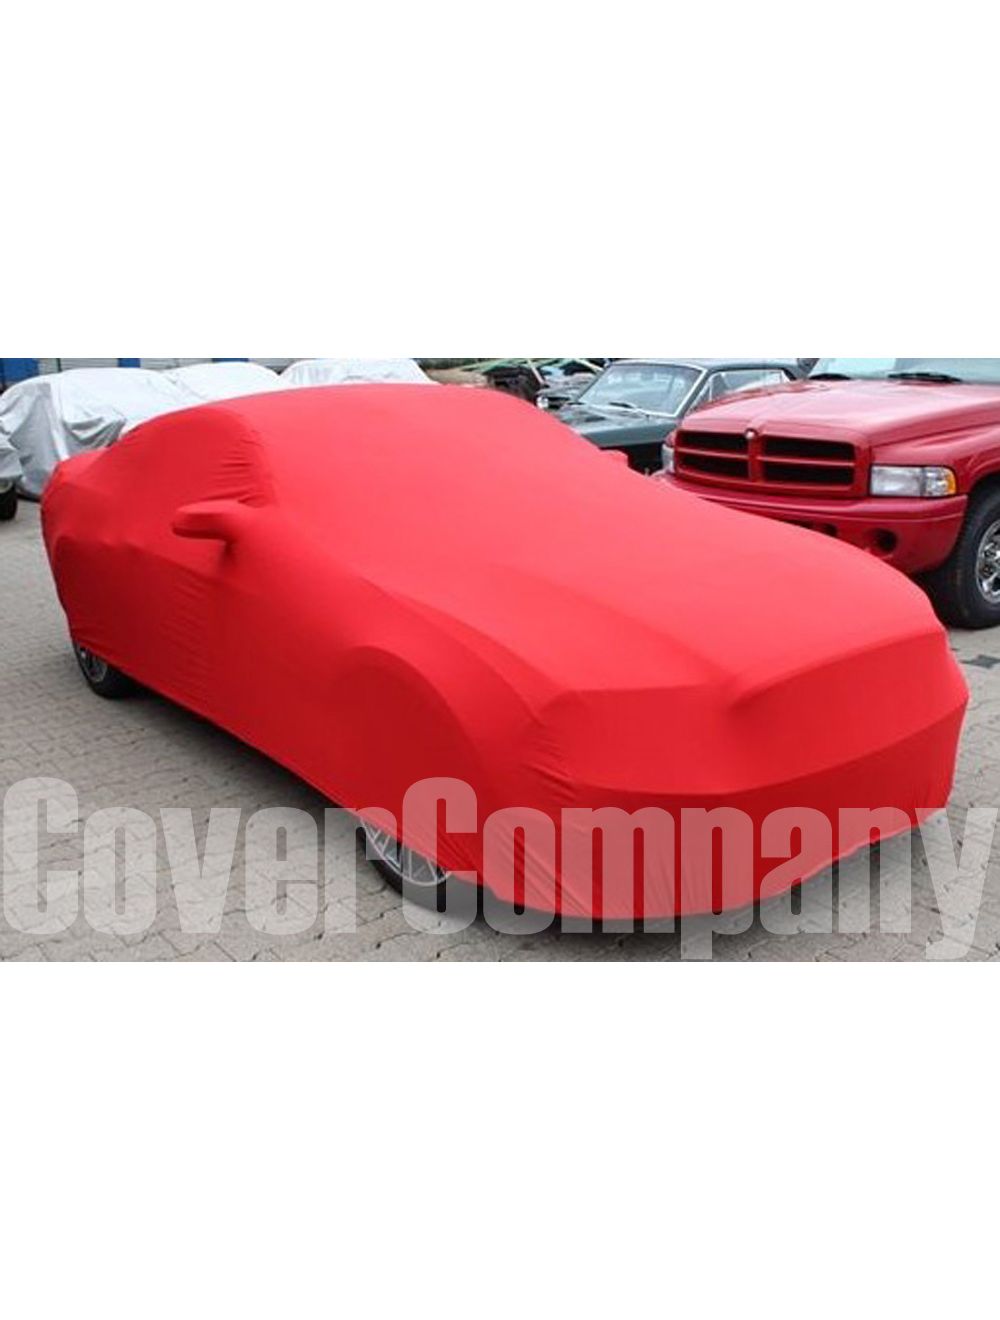 Indoor Ford Car Cover. High quality car covers US